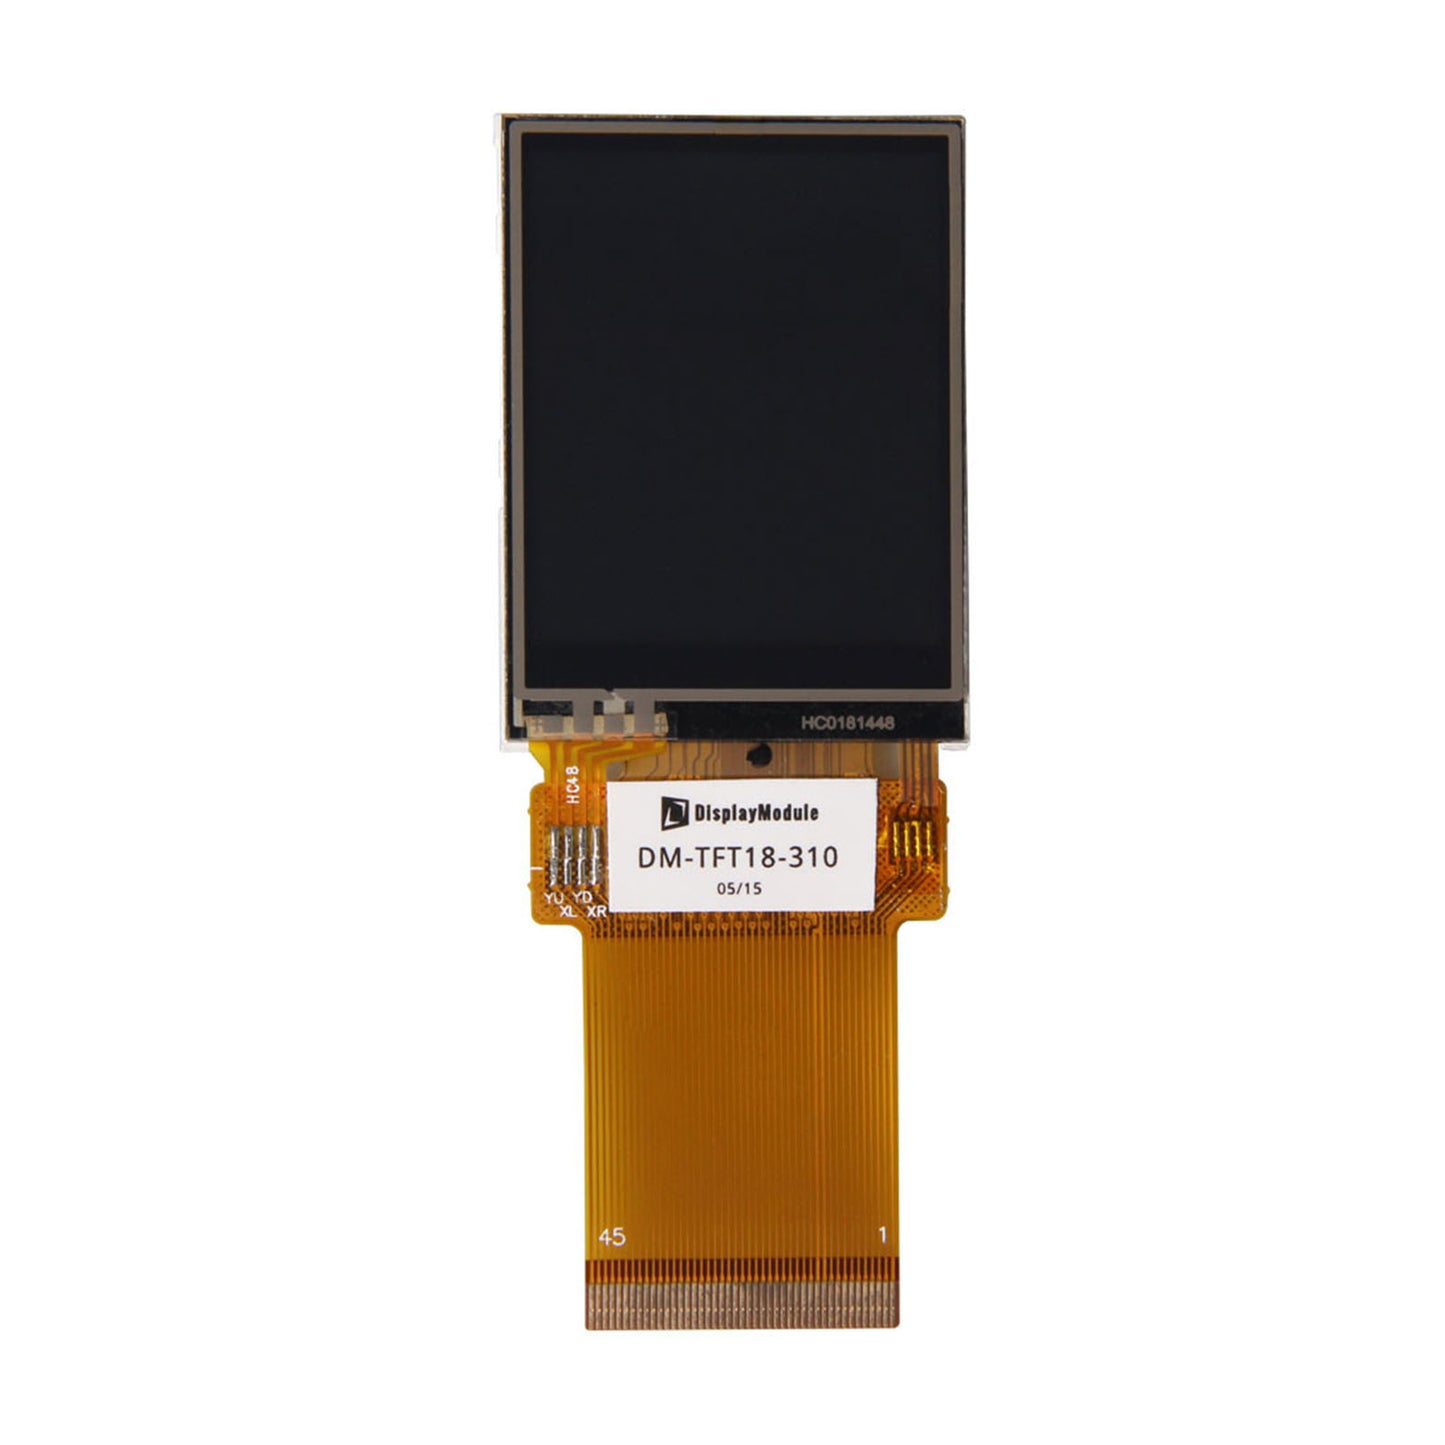 1.8-inch TFT Display with a resolution of 128 by 160 pixels, featuring resistive touch, interfaced with SPI, MCU, and RGB support